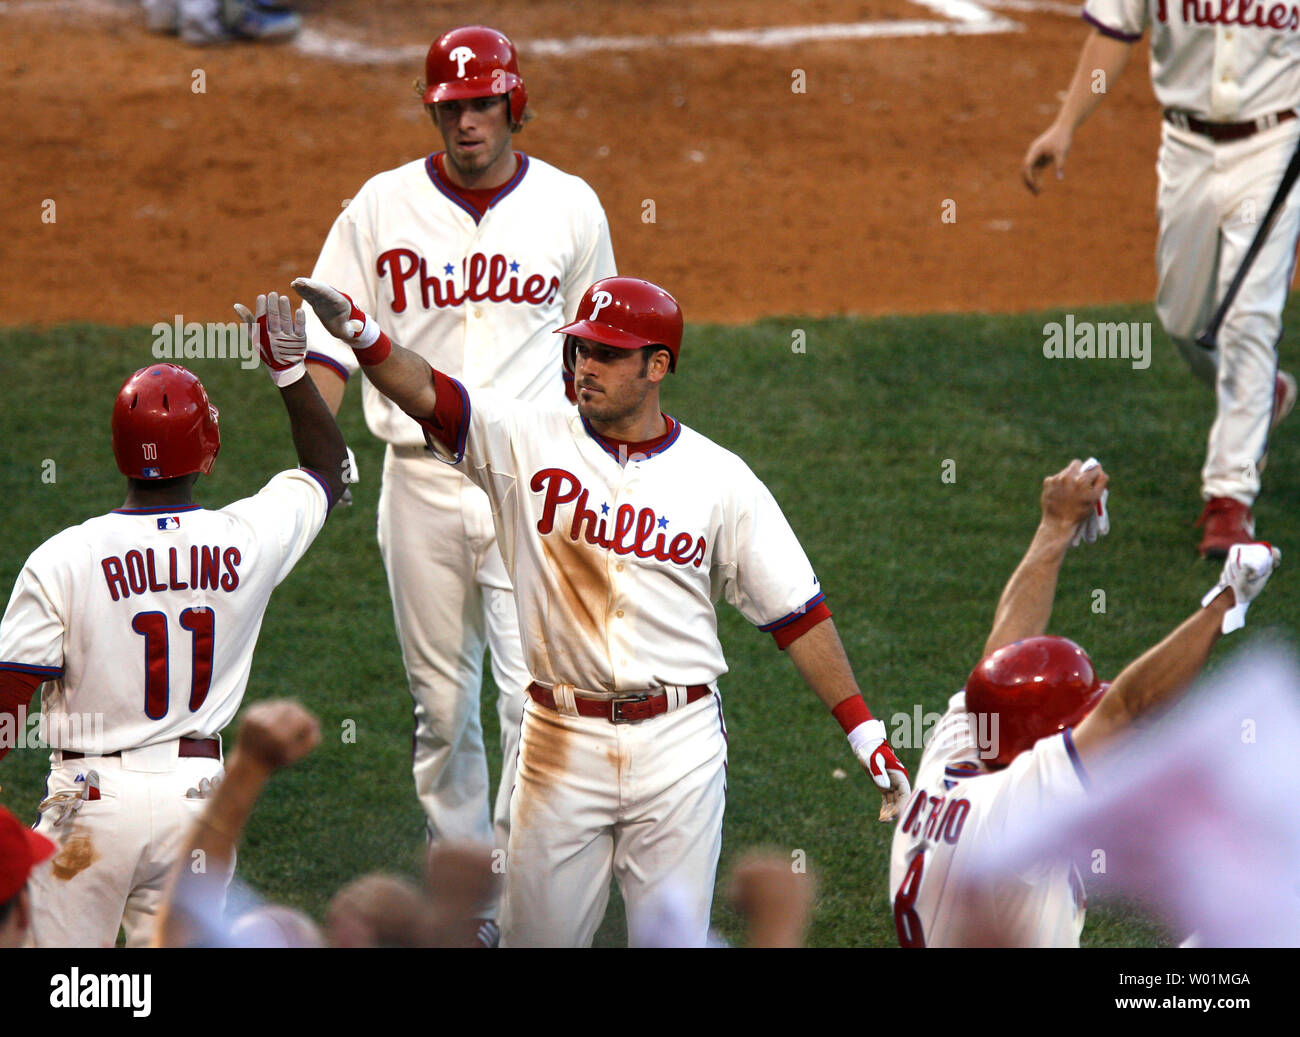 Philadelphia Phillies Jimmy Rollins (11) greets teammates Greg Dobbs and Jason Werth (background) at the dugout after they scored during 3nd inning Philadelphia Phillies-Los Angeles Dodgers NLCS play in Philadelphia at Citizens Bank Park October 10, 2008. Phillies Shane Victorino (far R) raises his arms in jubliation.      (UPI Photo/John Anderson) Stock Photo